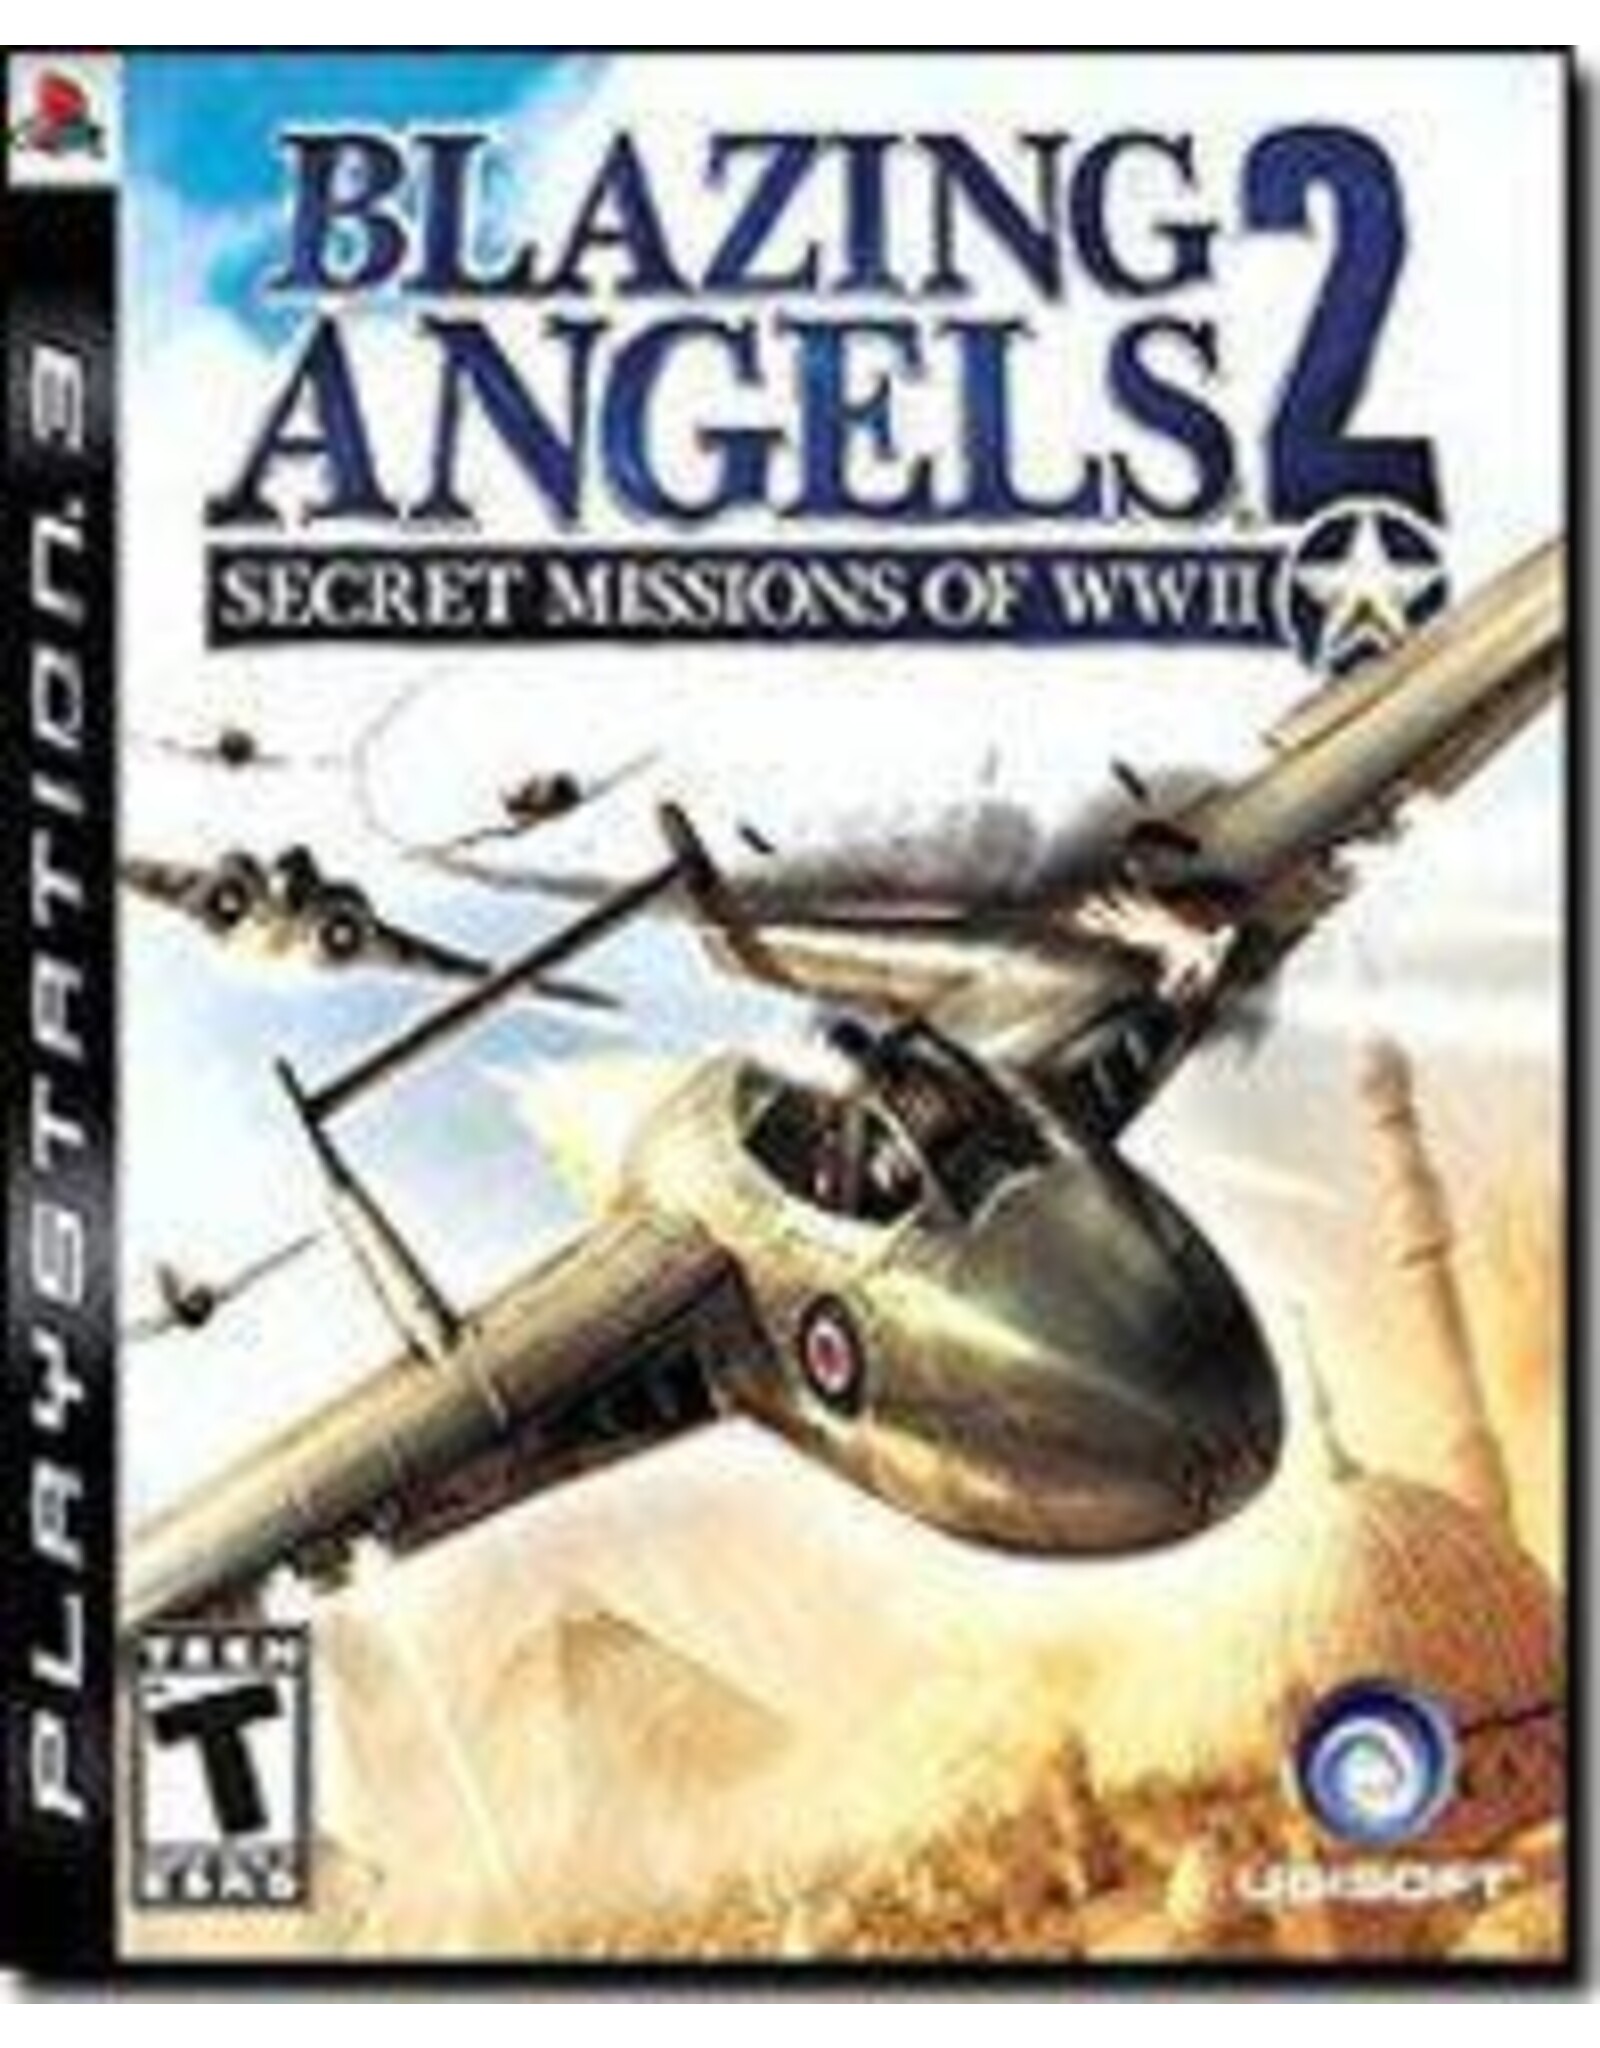 Playstation 3 Blazing Angels 2 Secret Missions of WWII (Used)